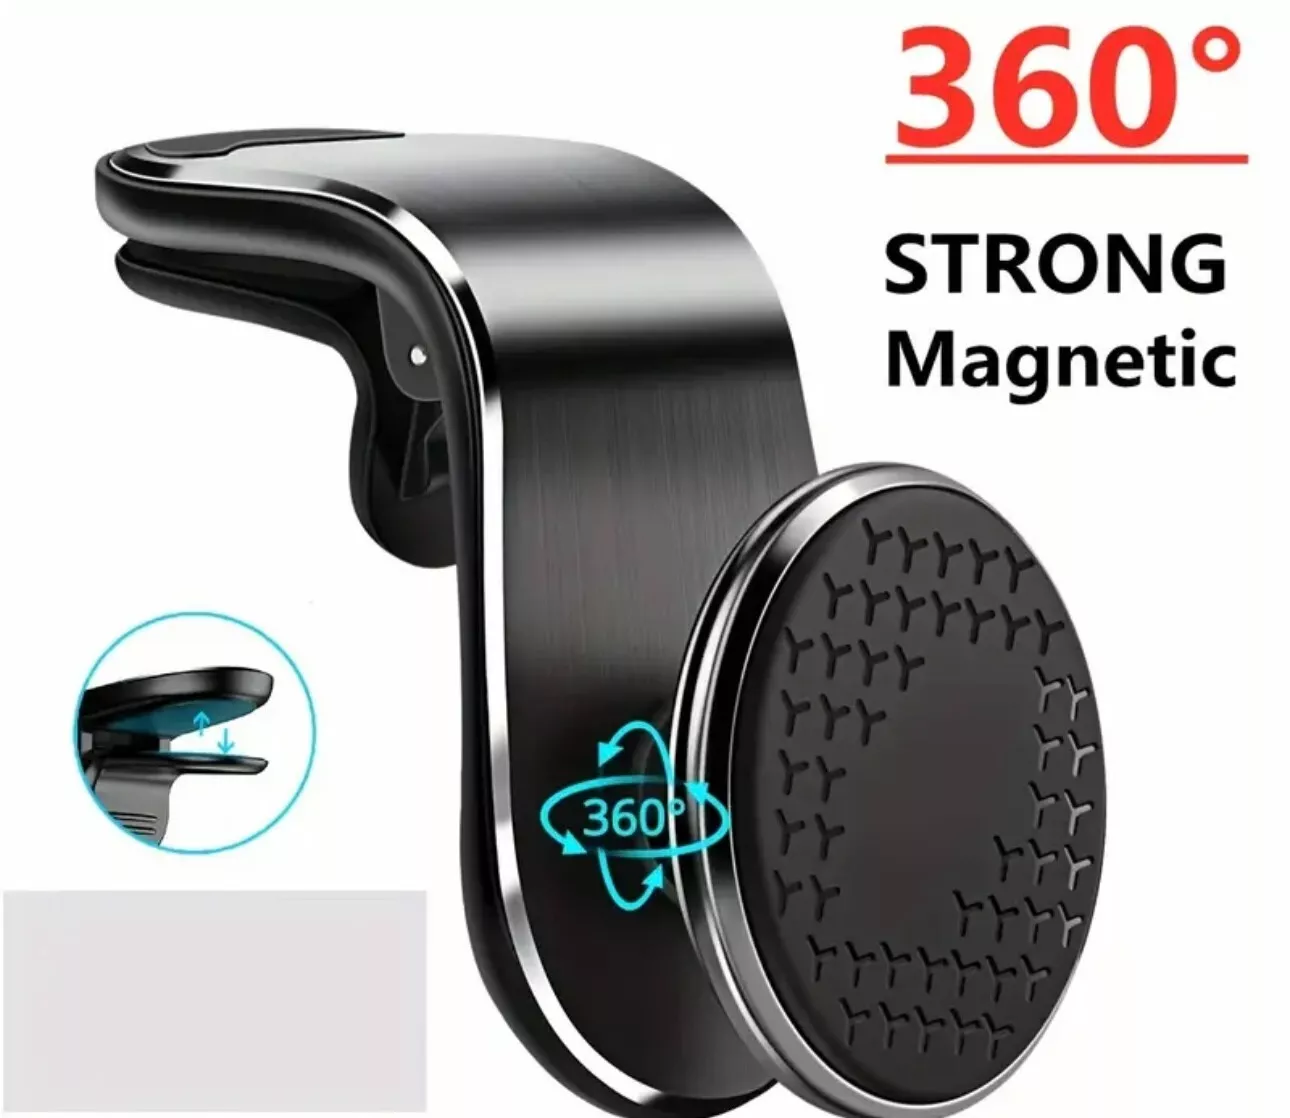 Vent Extended Magnetic Mount for Phones and GPS Devices